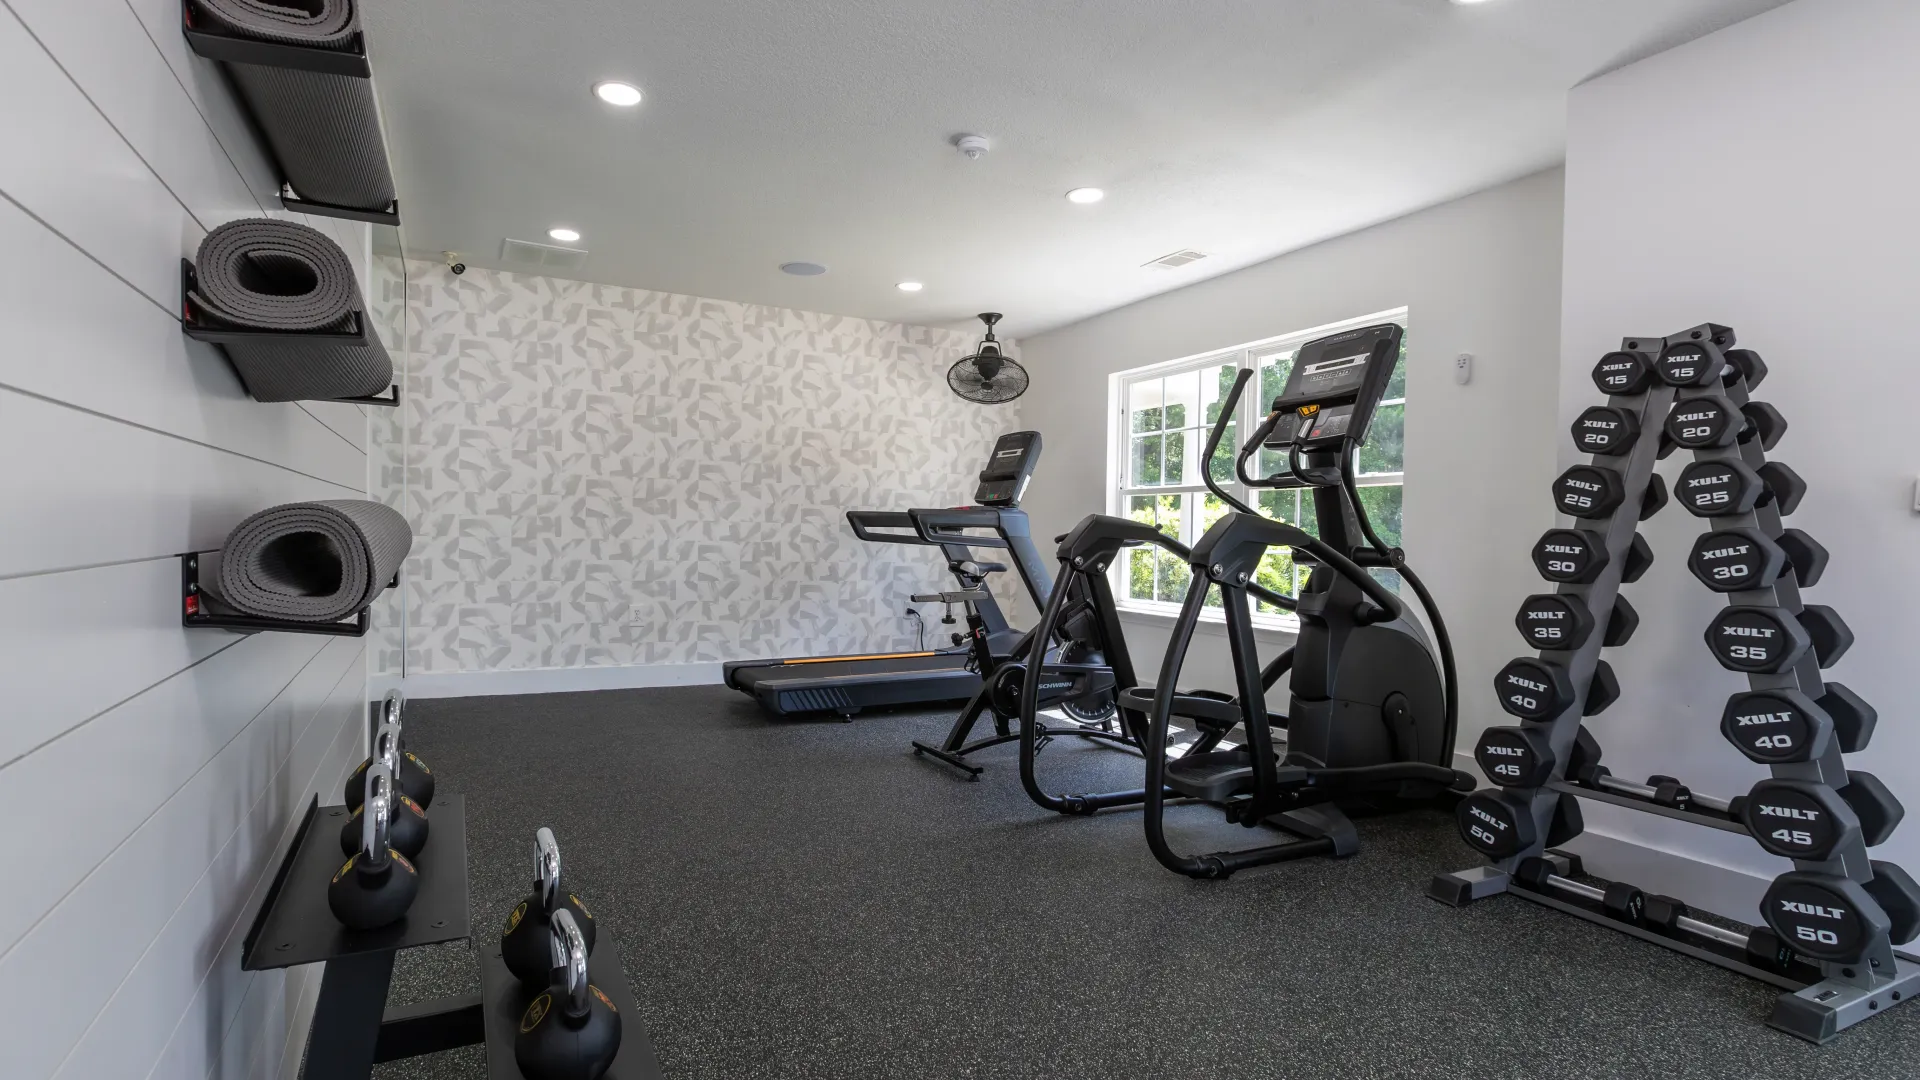 A fitness center complete with cardio equipment, free weights, yoga mats, and more.